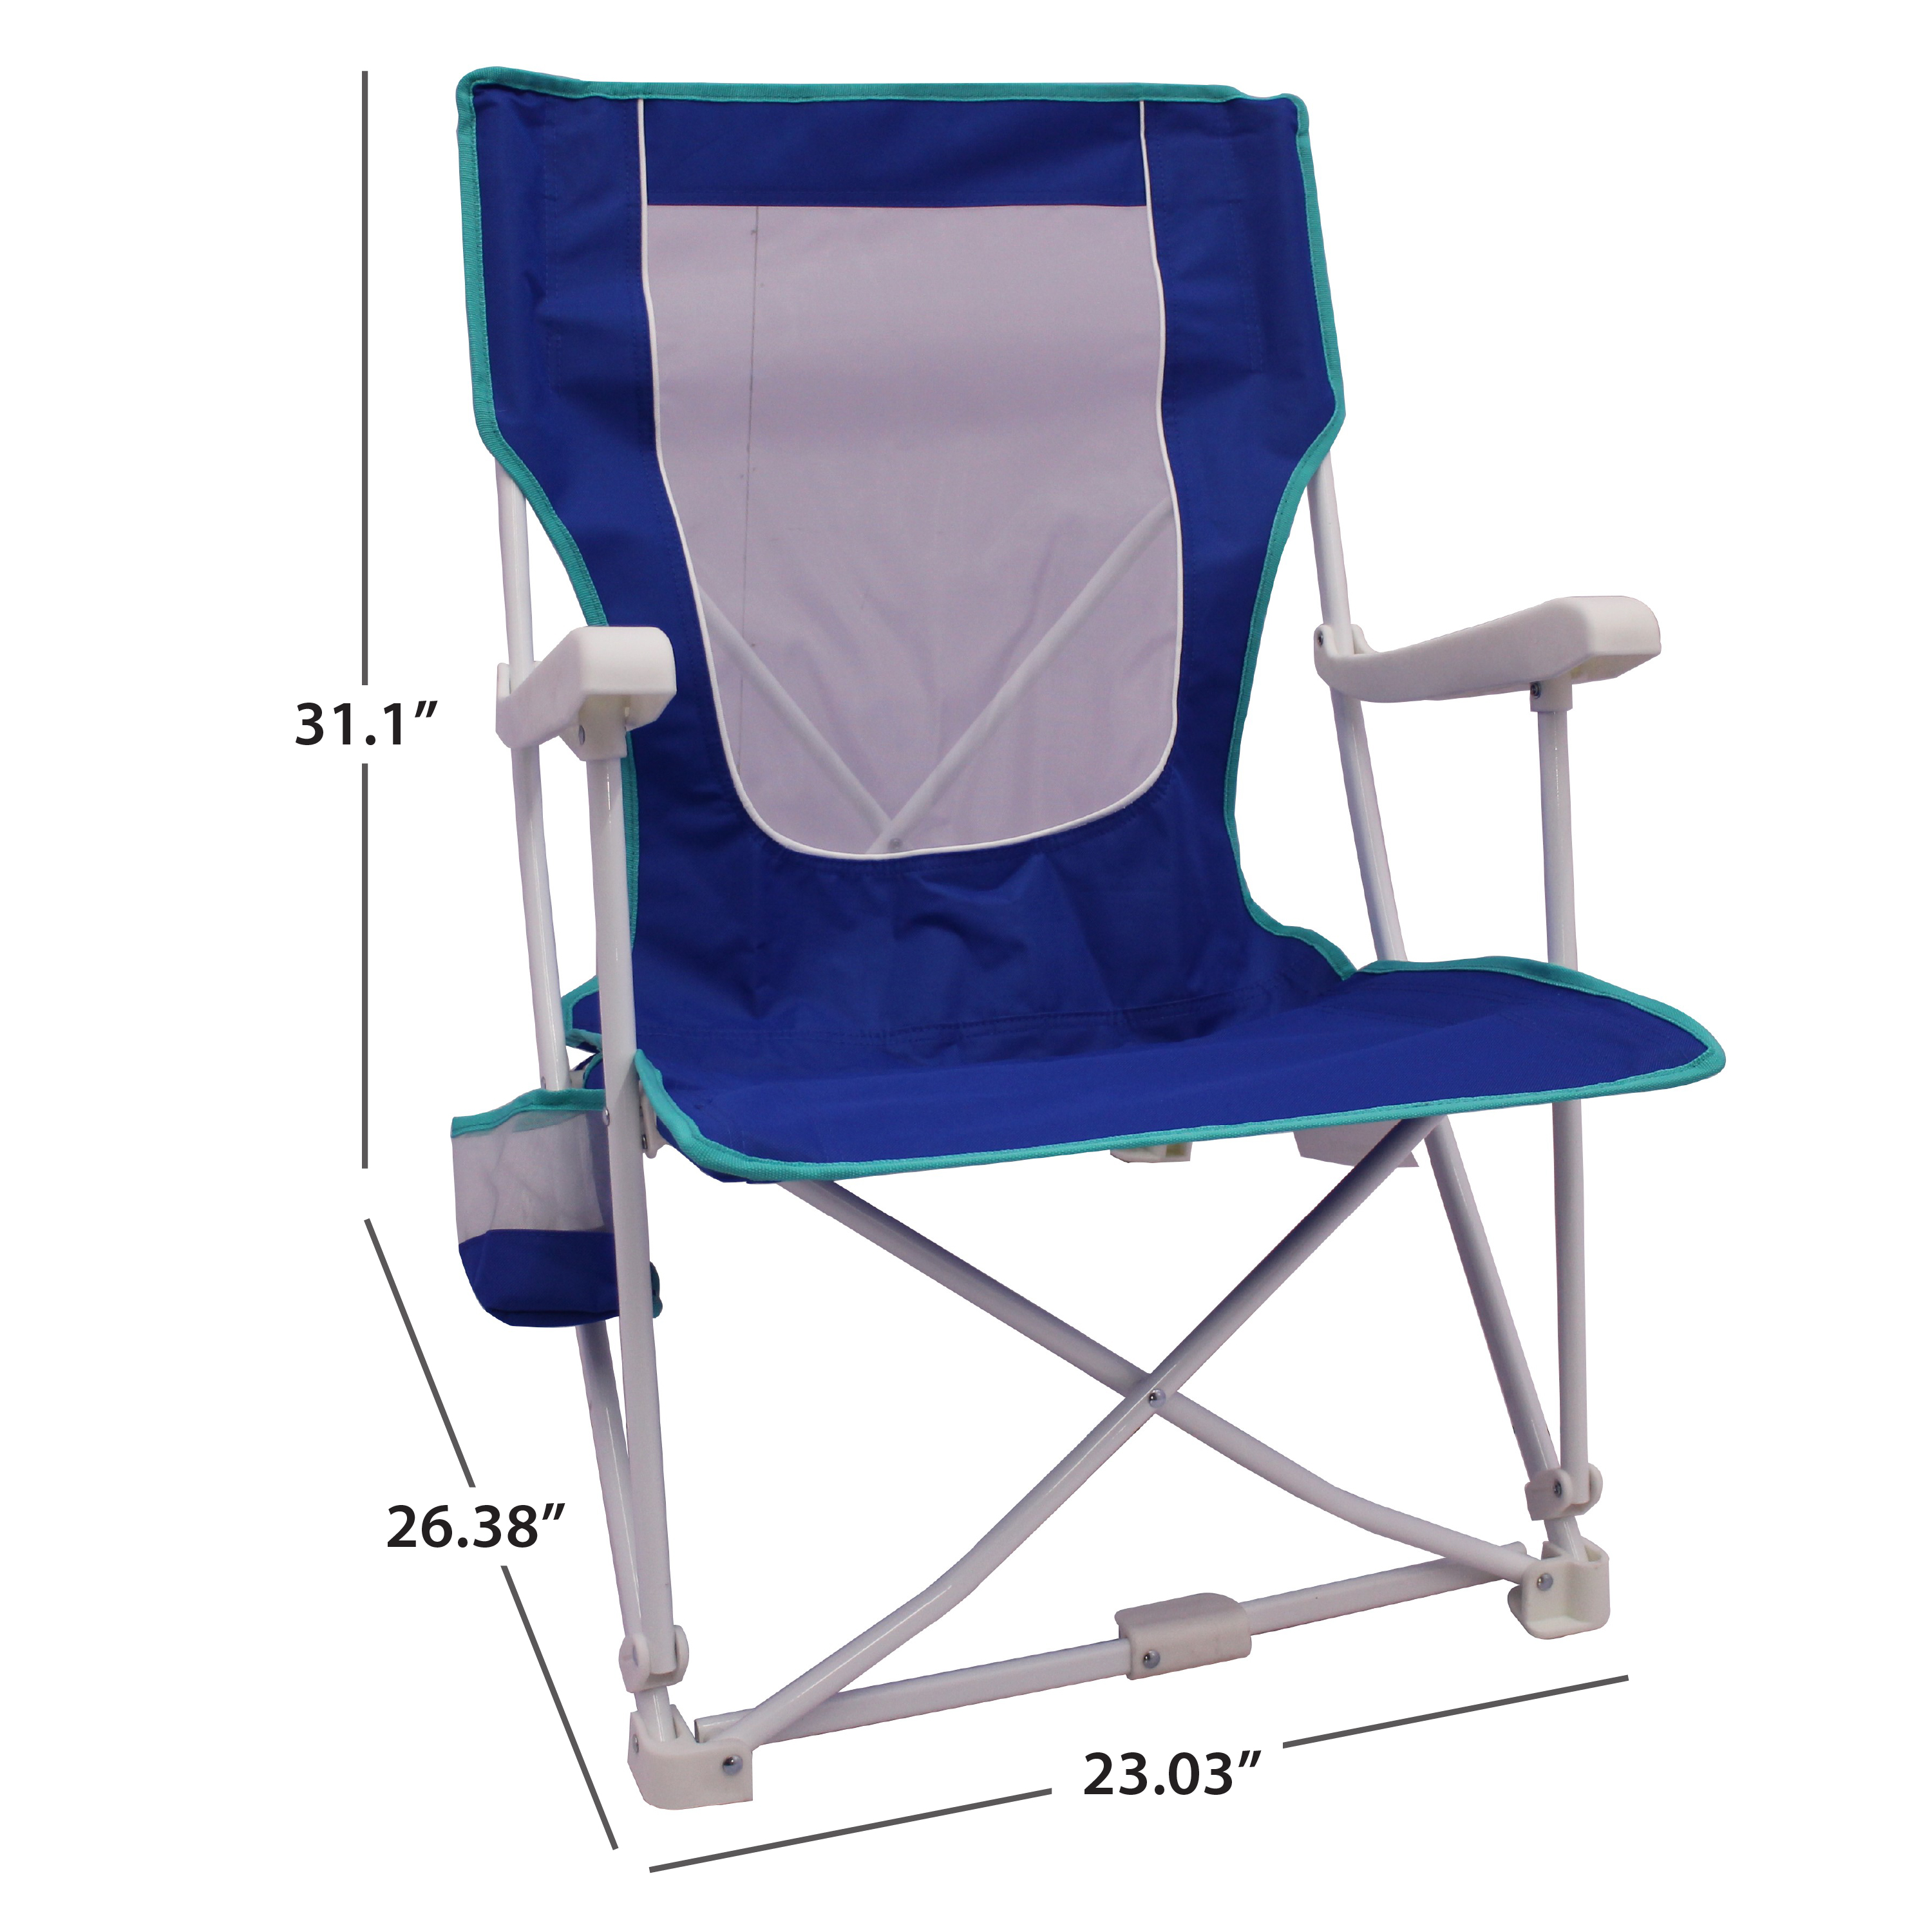 2-Pack Mainstays Folding Hard Arm Beach Bag Chair with Carry Bag, Blue - image 5 of 9